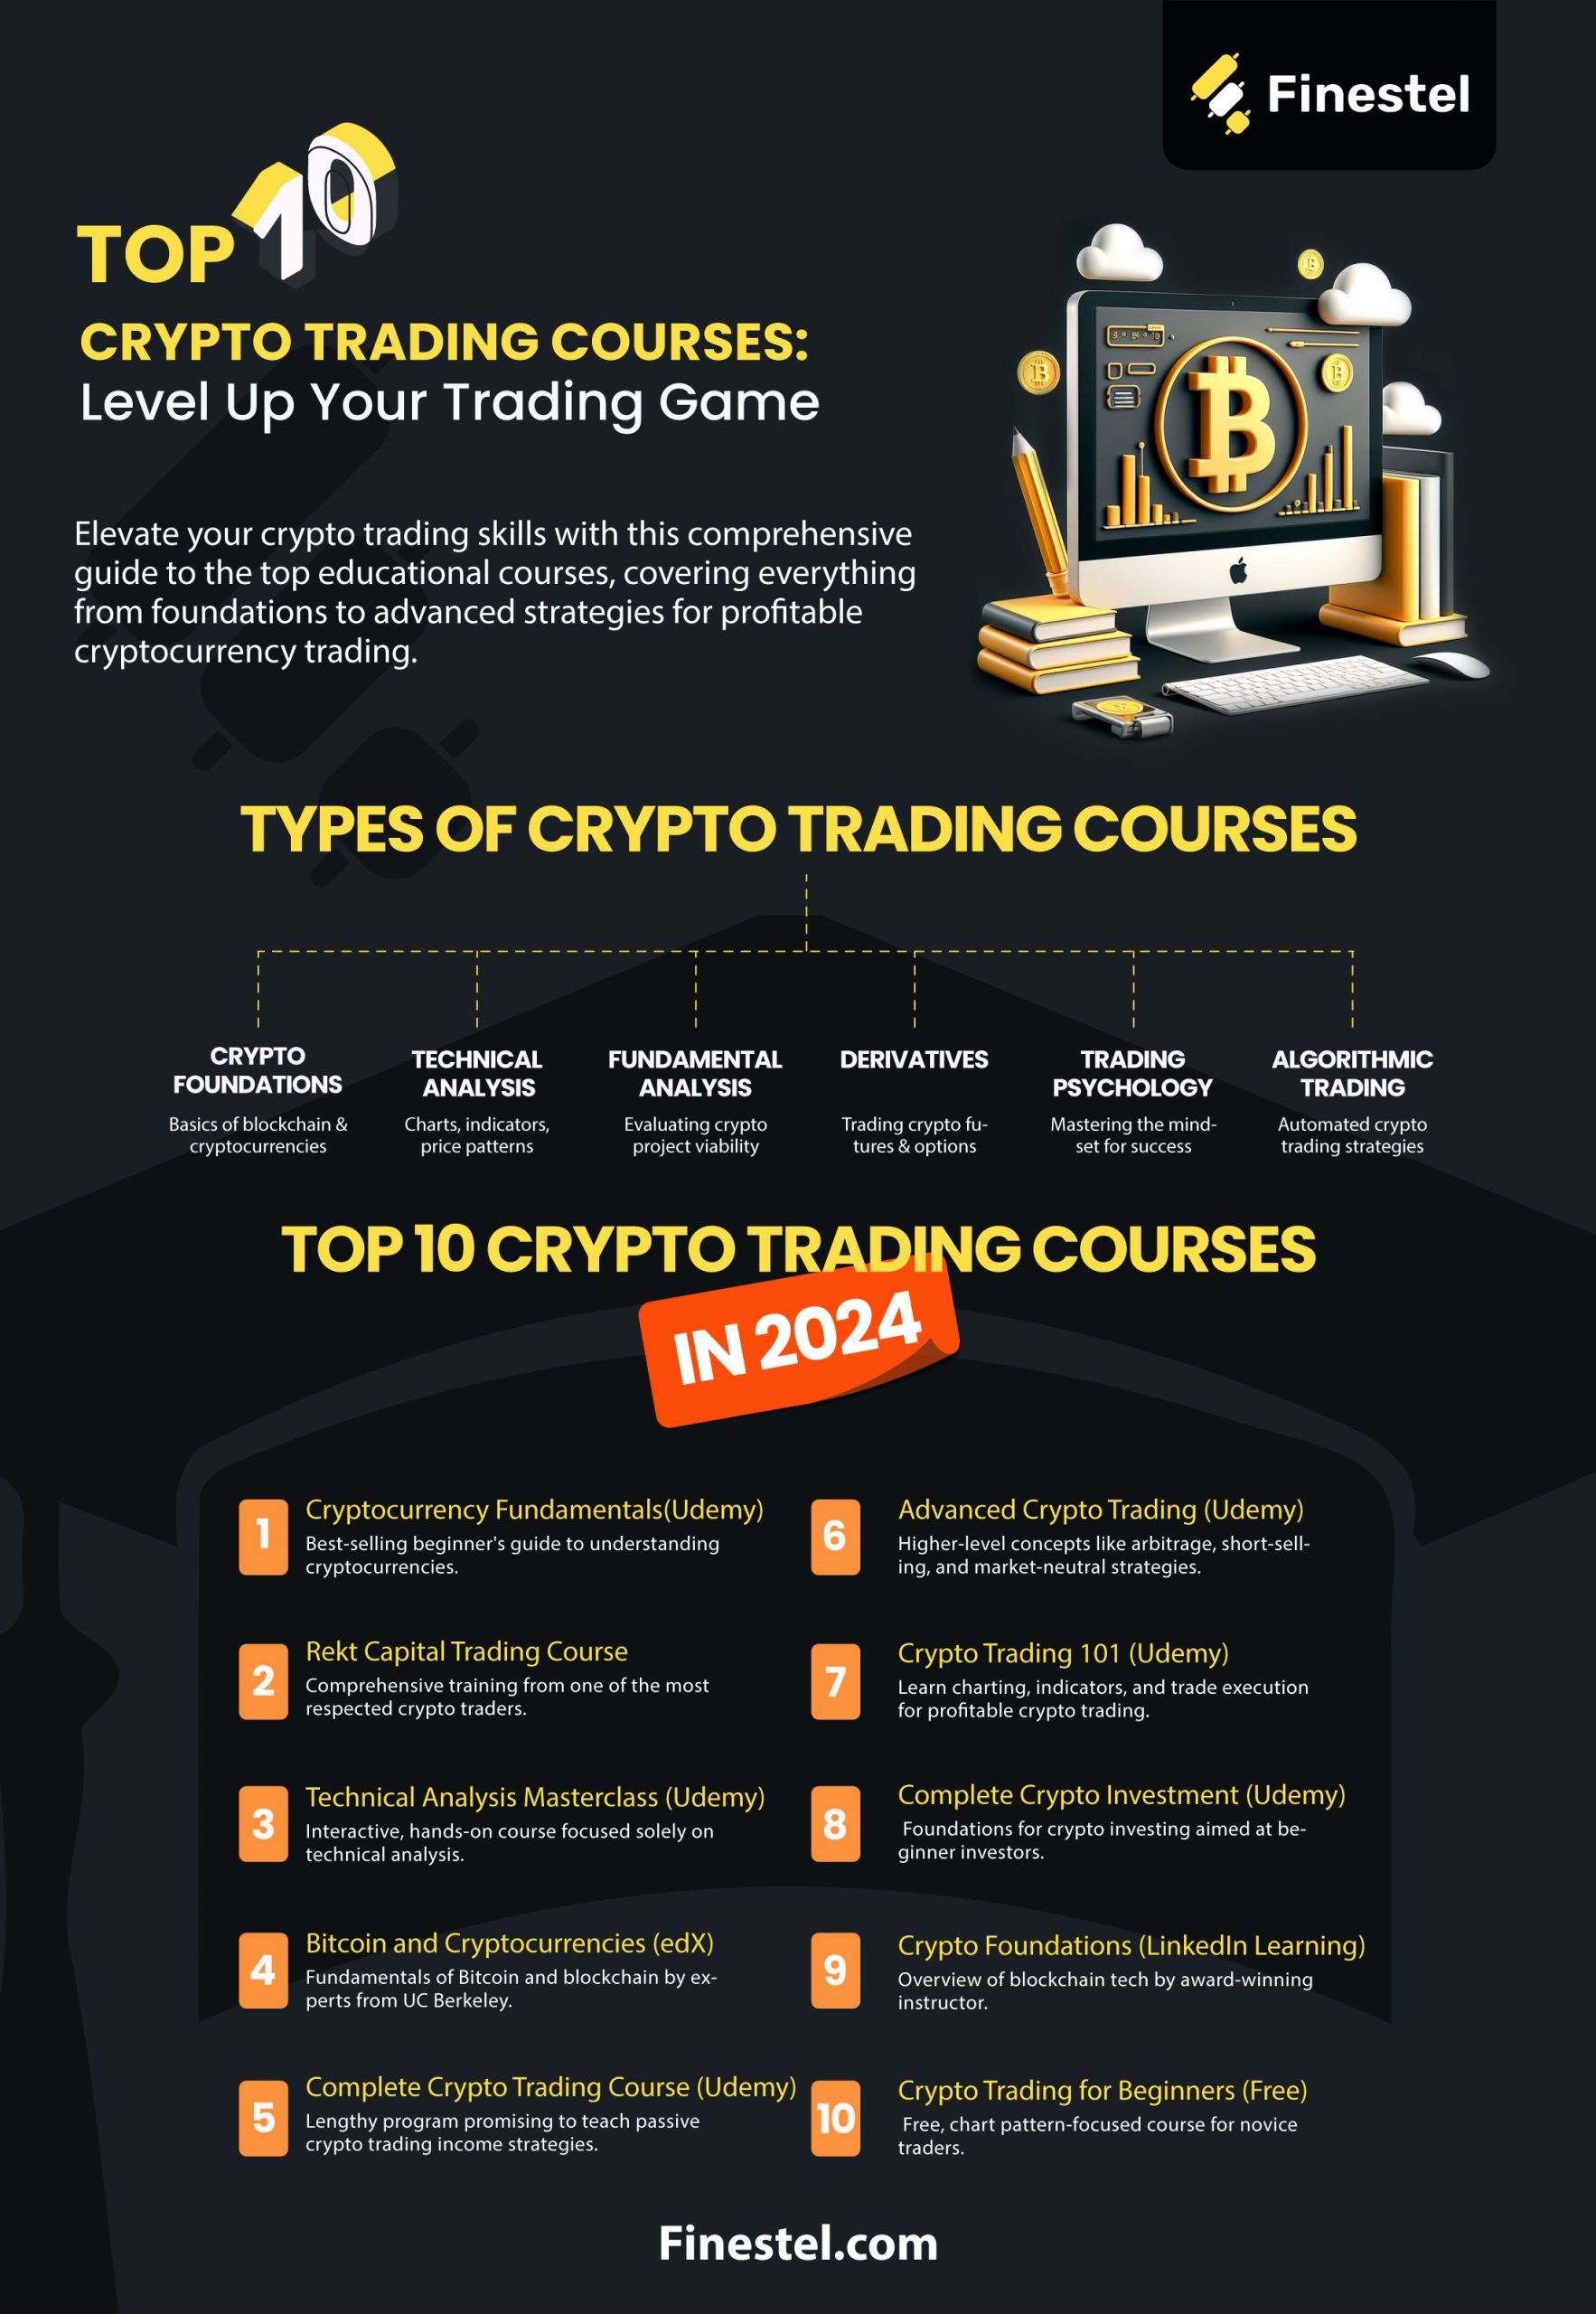 The Best Crypto Trading Courses in 2024 Infographic